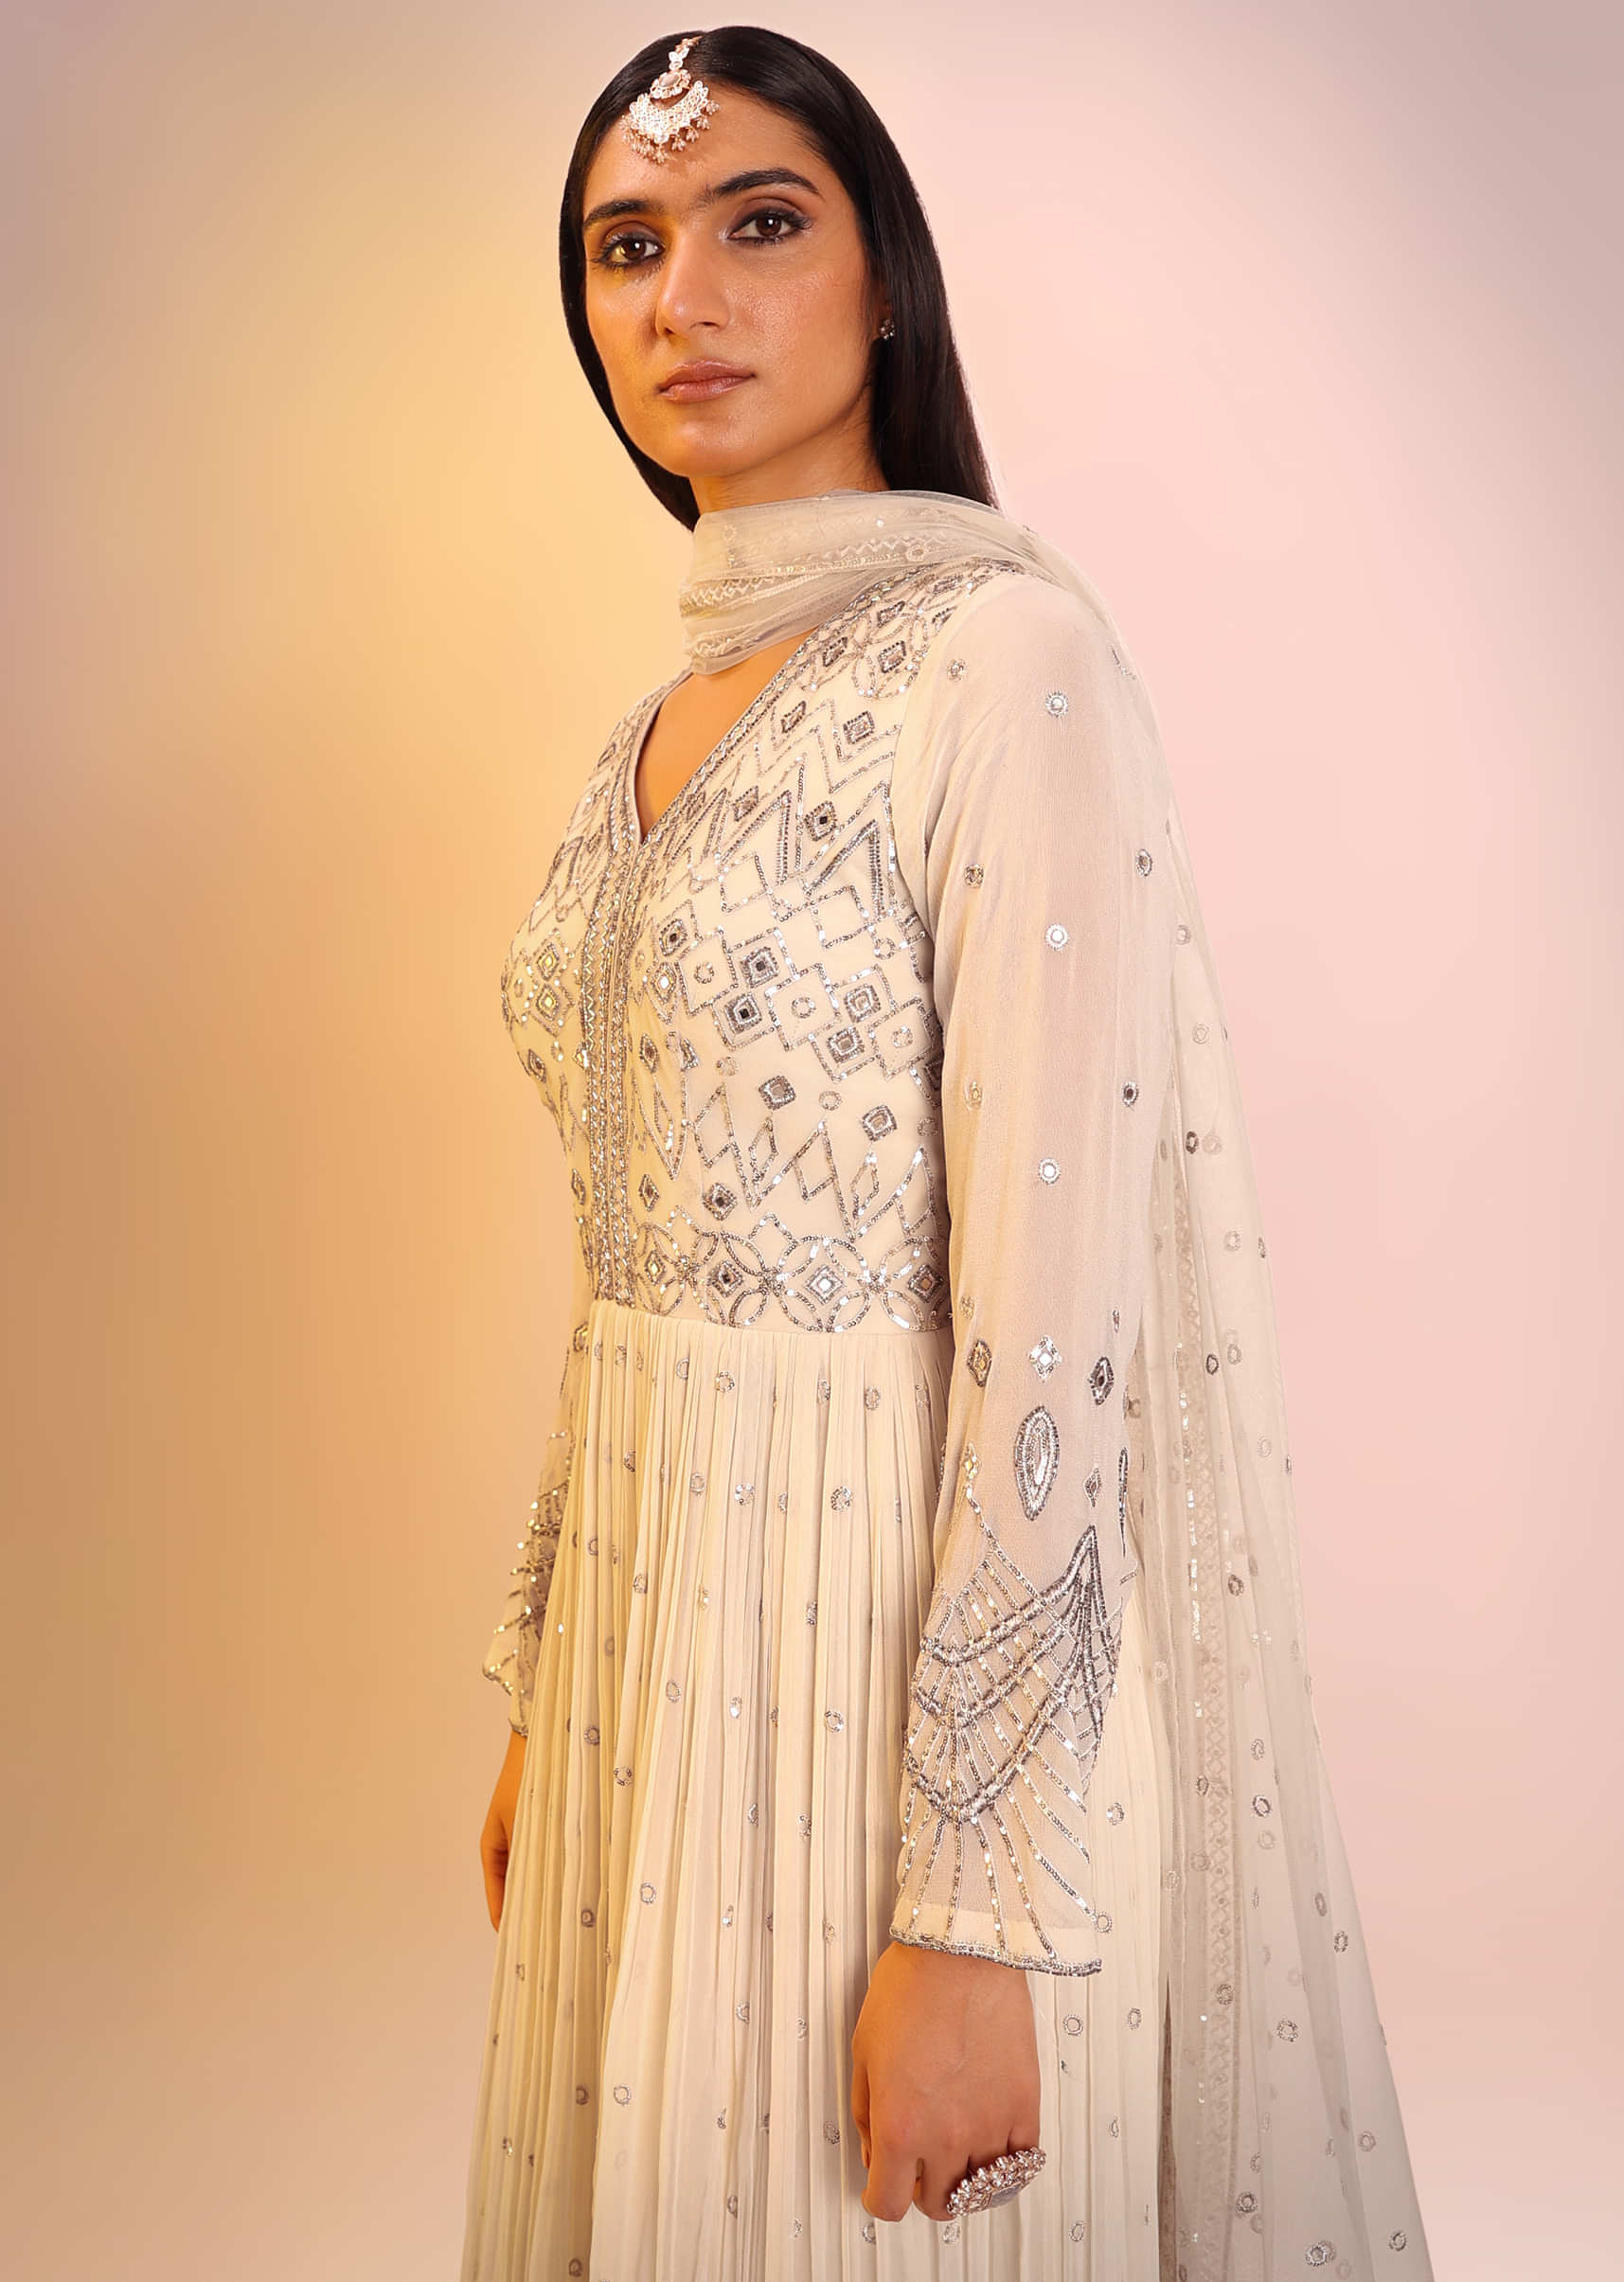 Off White Sharara Suit In Georgette With Sequins And Mirror Embroidered Geometric Design